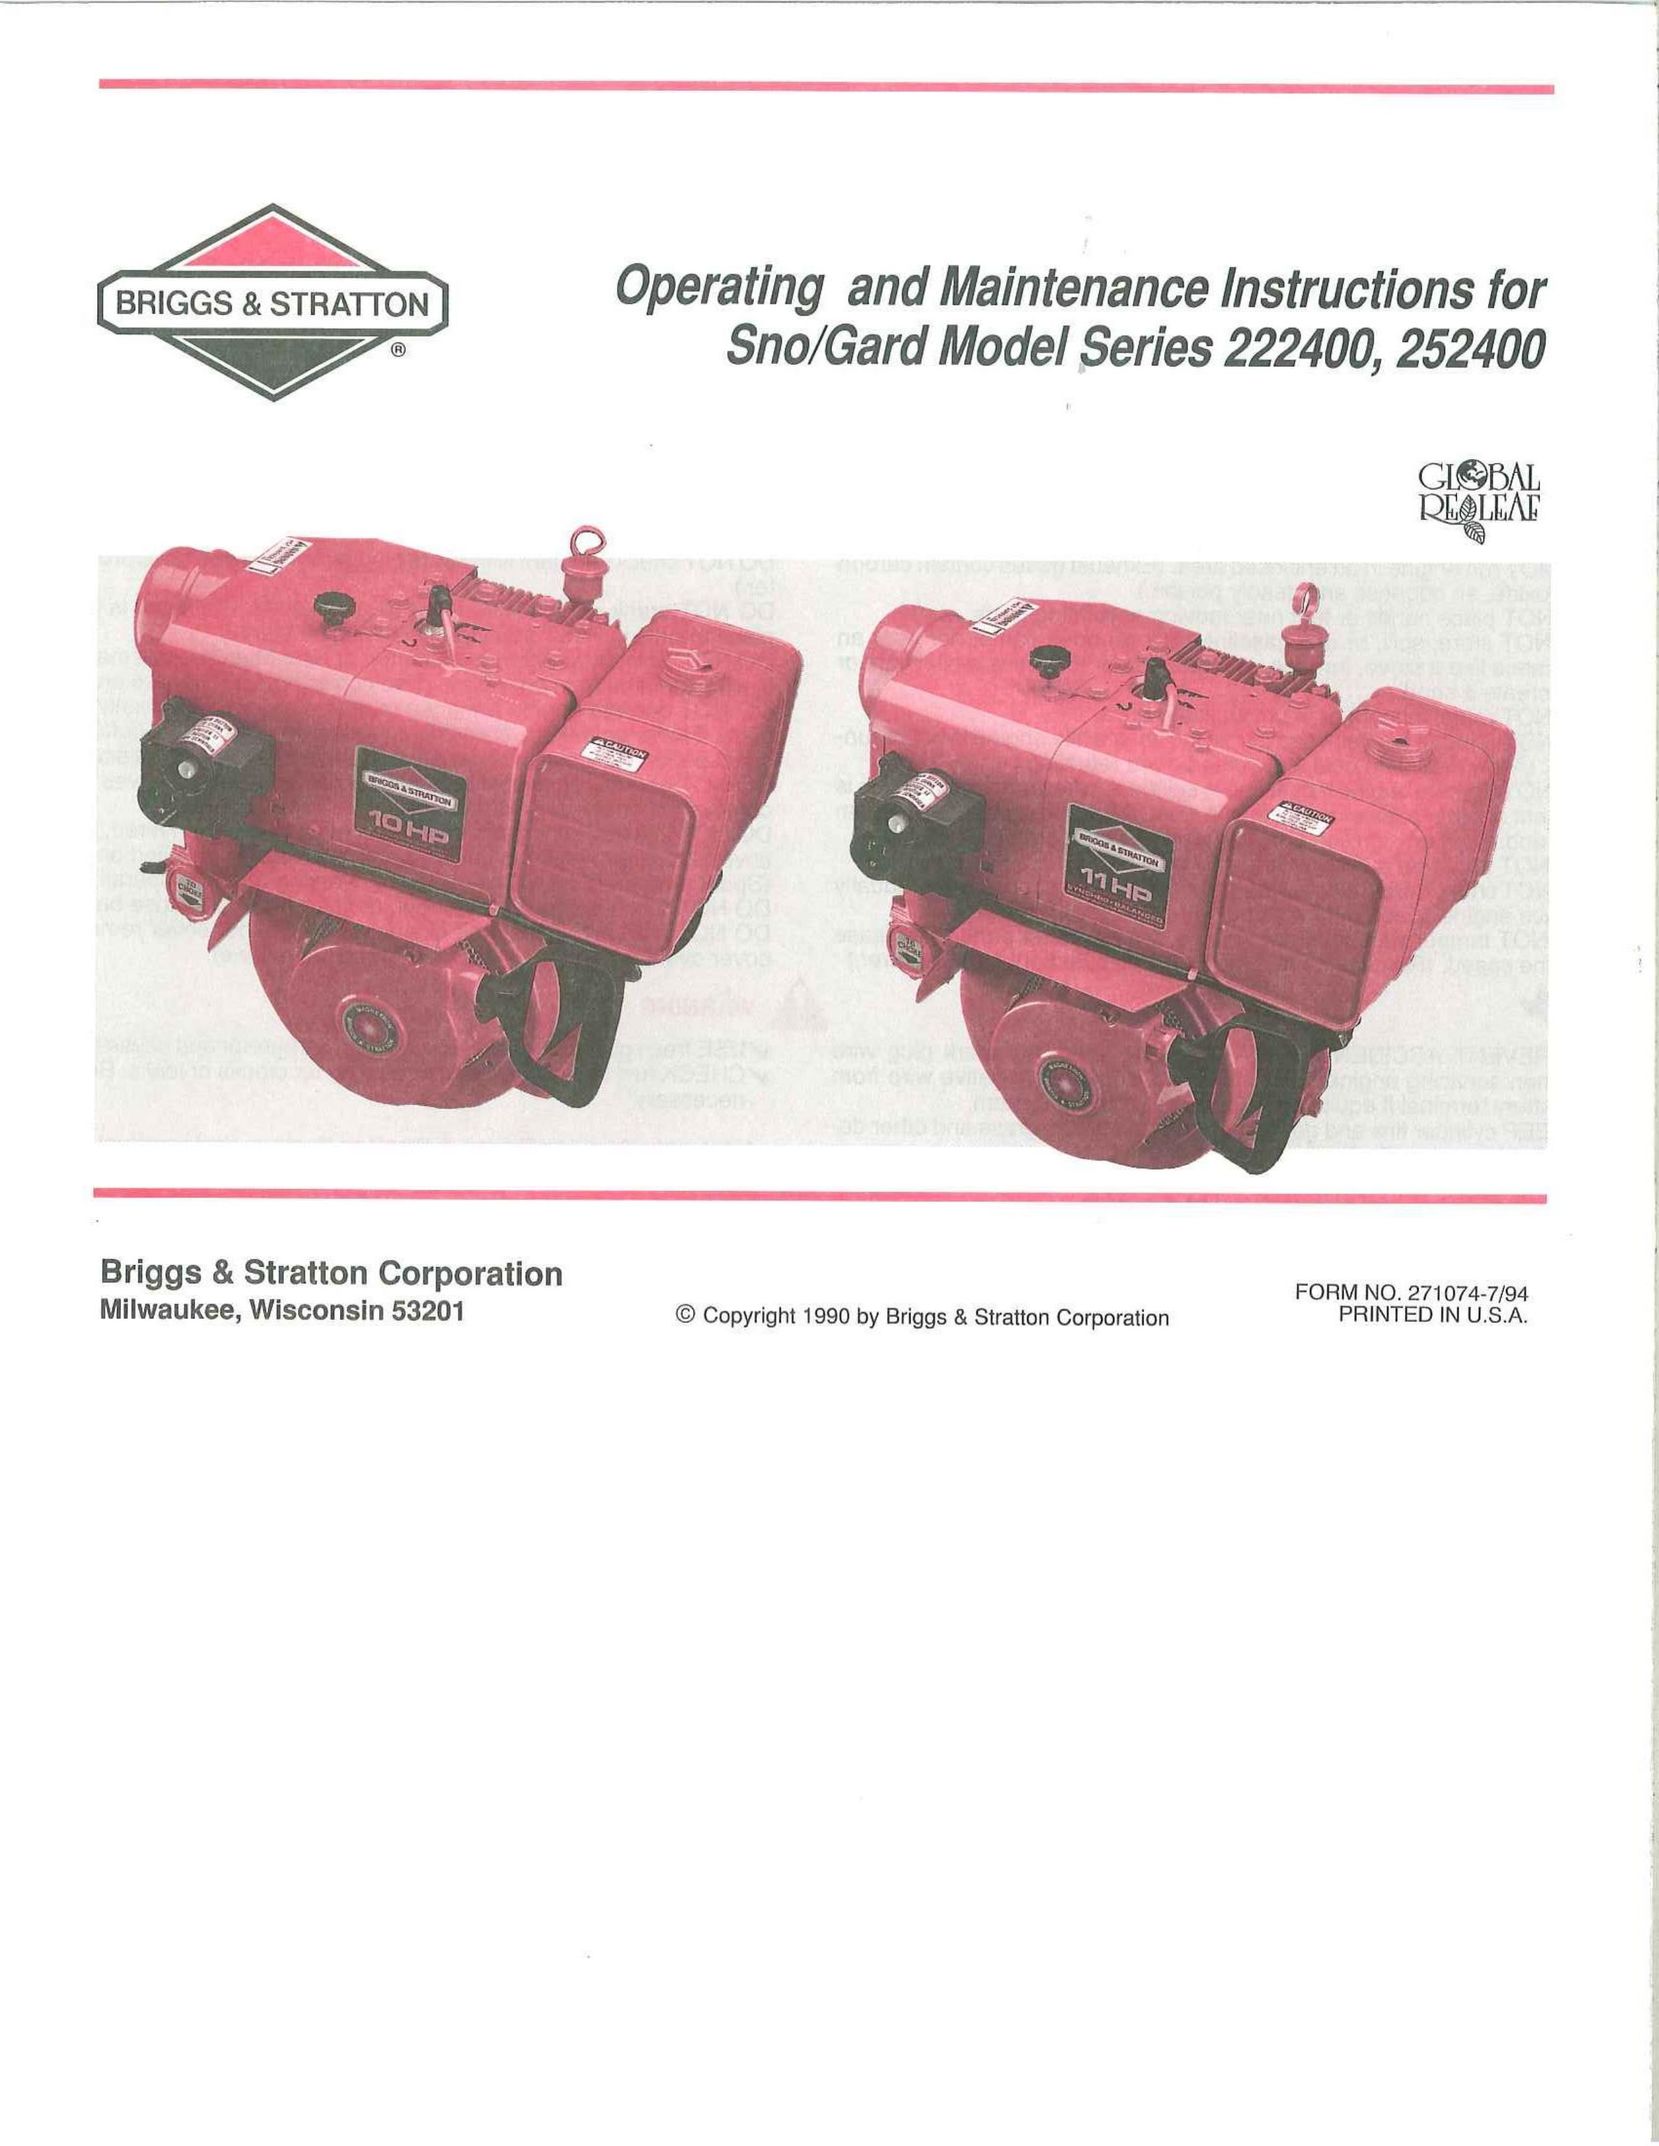 Briggs & Stratton 252400 Snowshoes User Manual